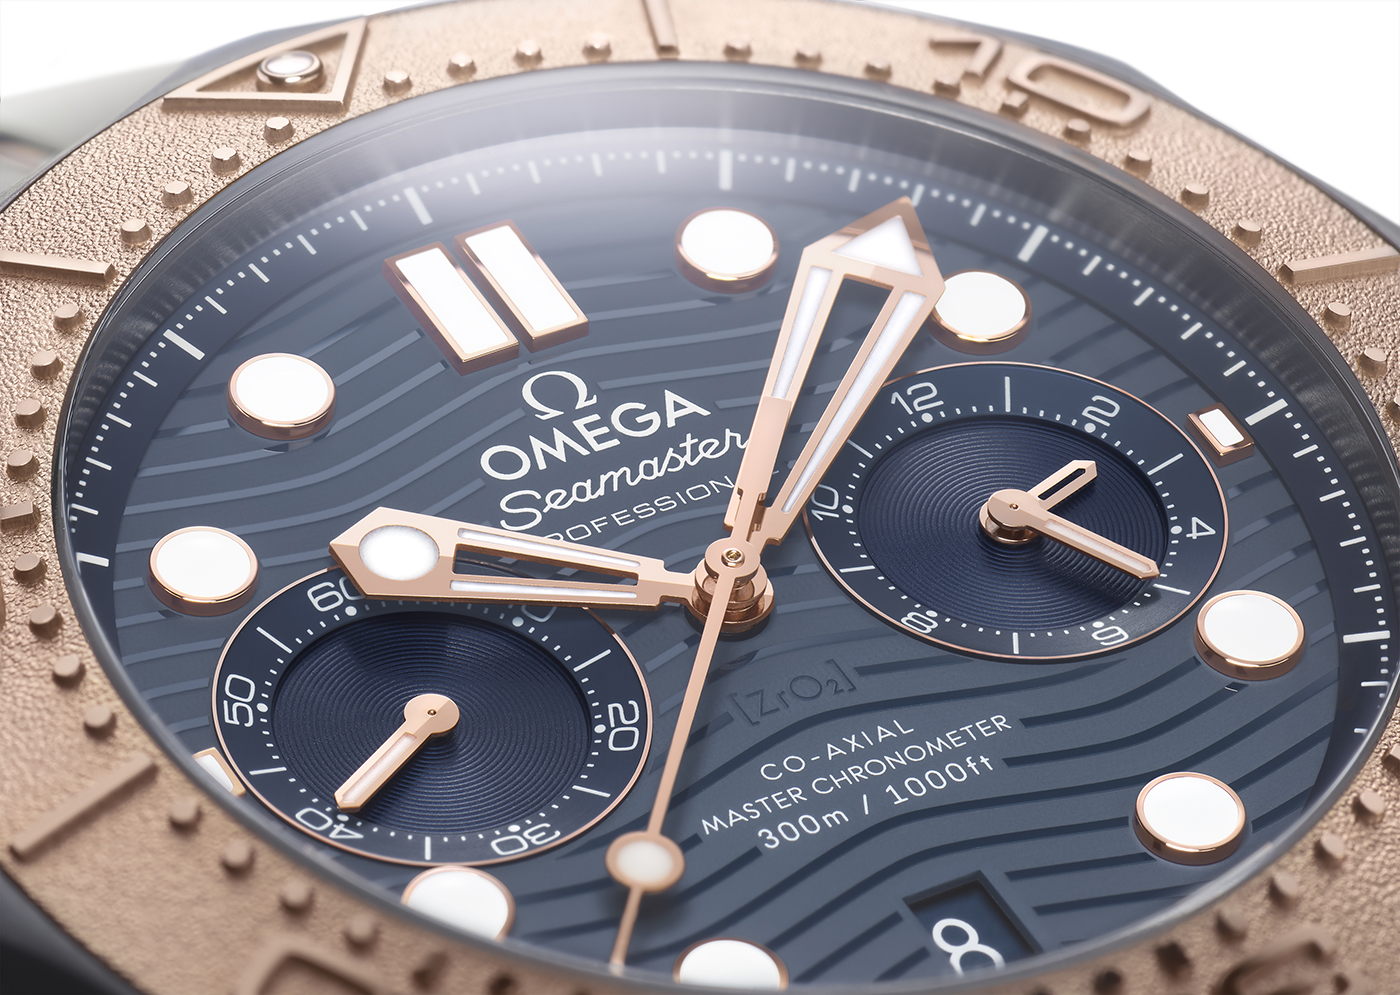 Omega Unveils New Seamaster Diver 300M Chronograph Watch In Titanium, Sedna Gold, And Tantalum Watch Releases 